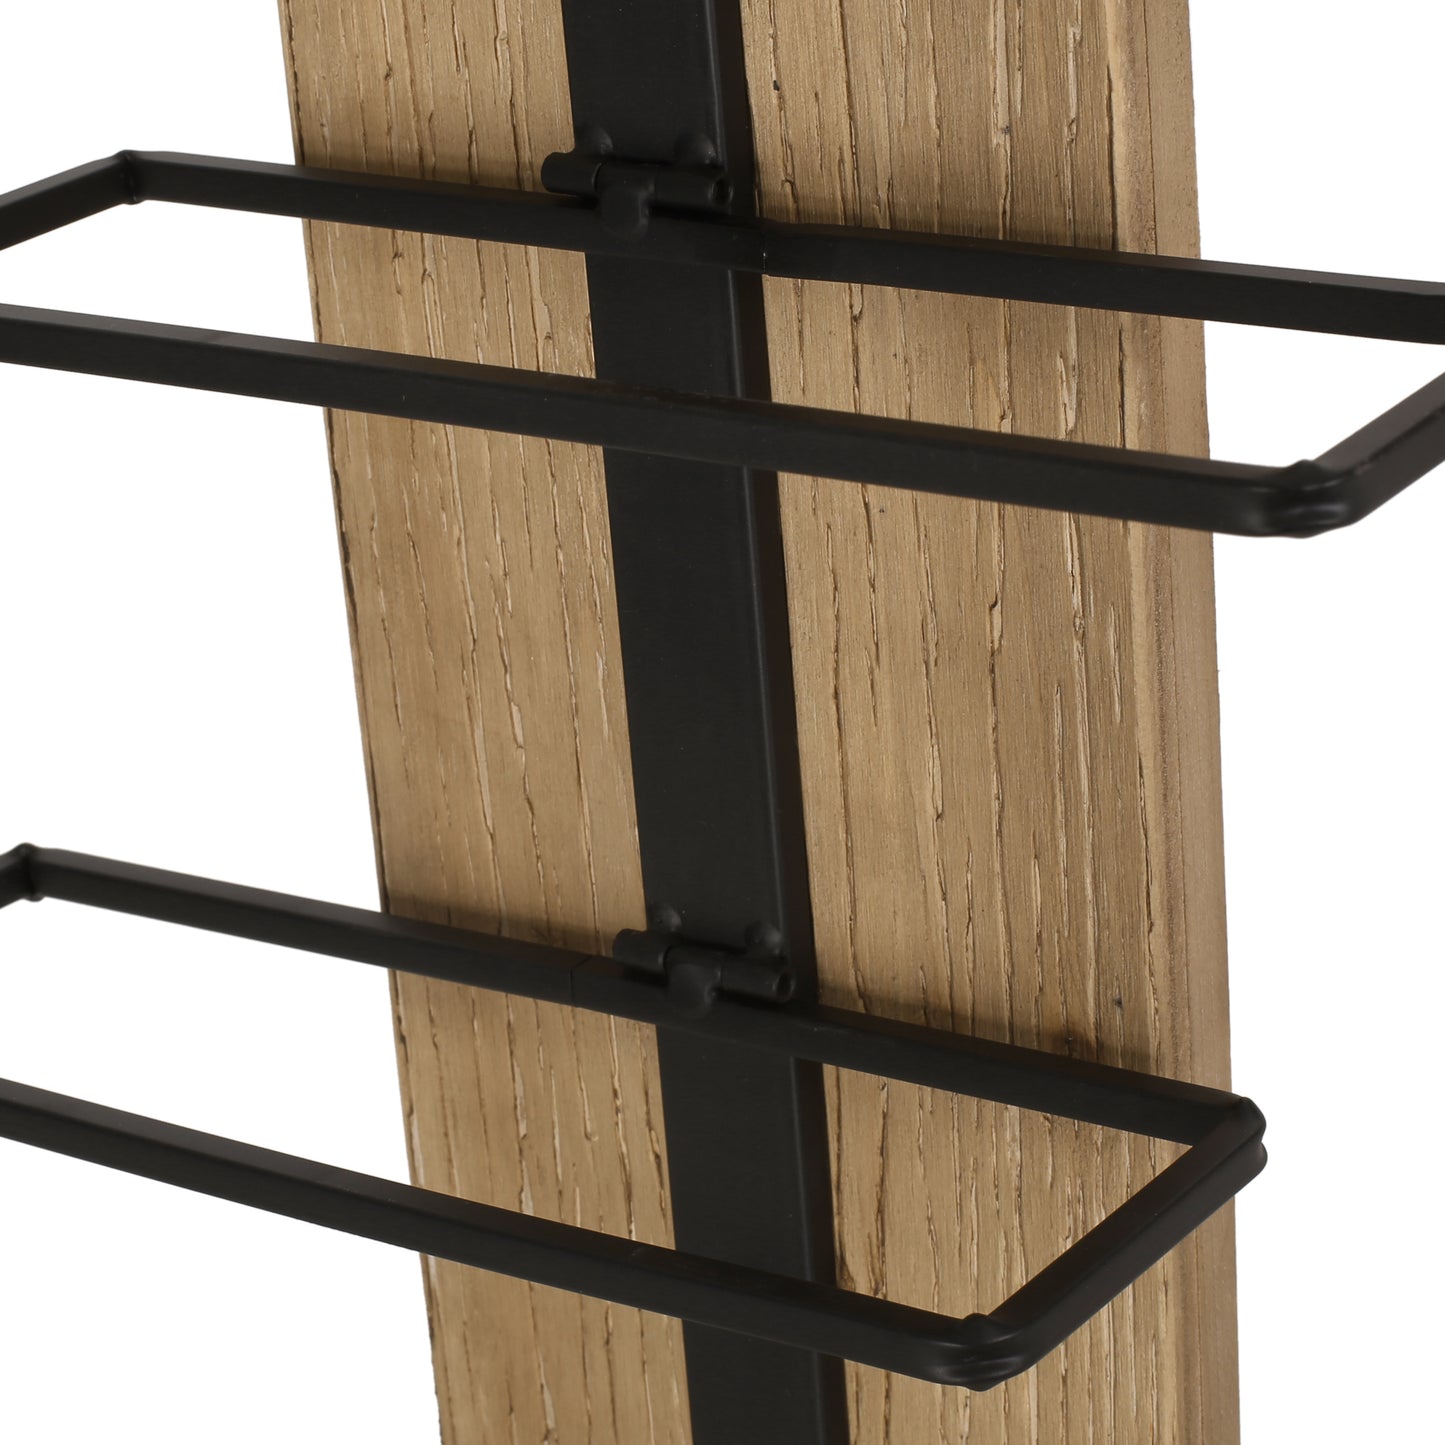 Boster Modern Industrial 8 Bottle Wall Mounted Wine Rack, Natural and Black